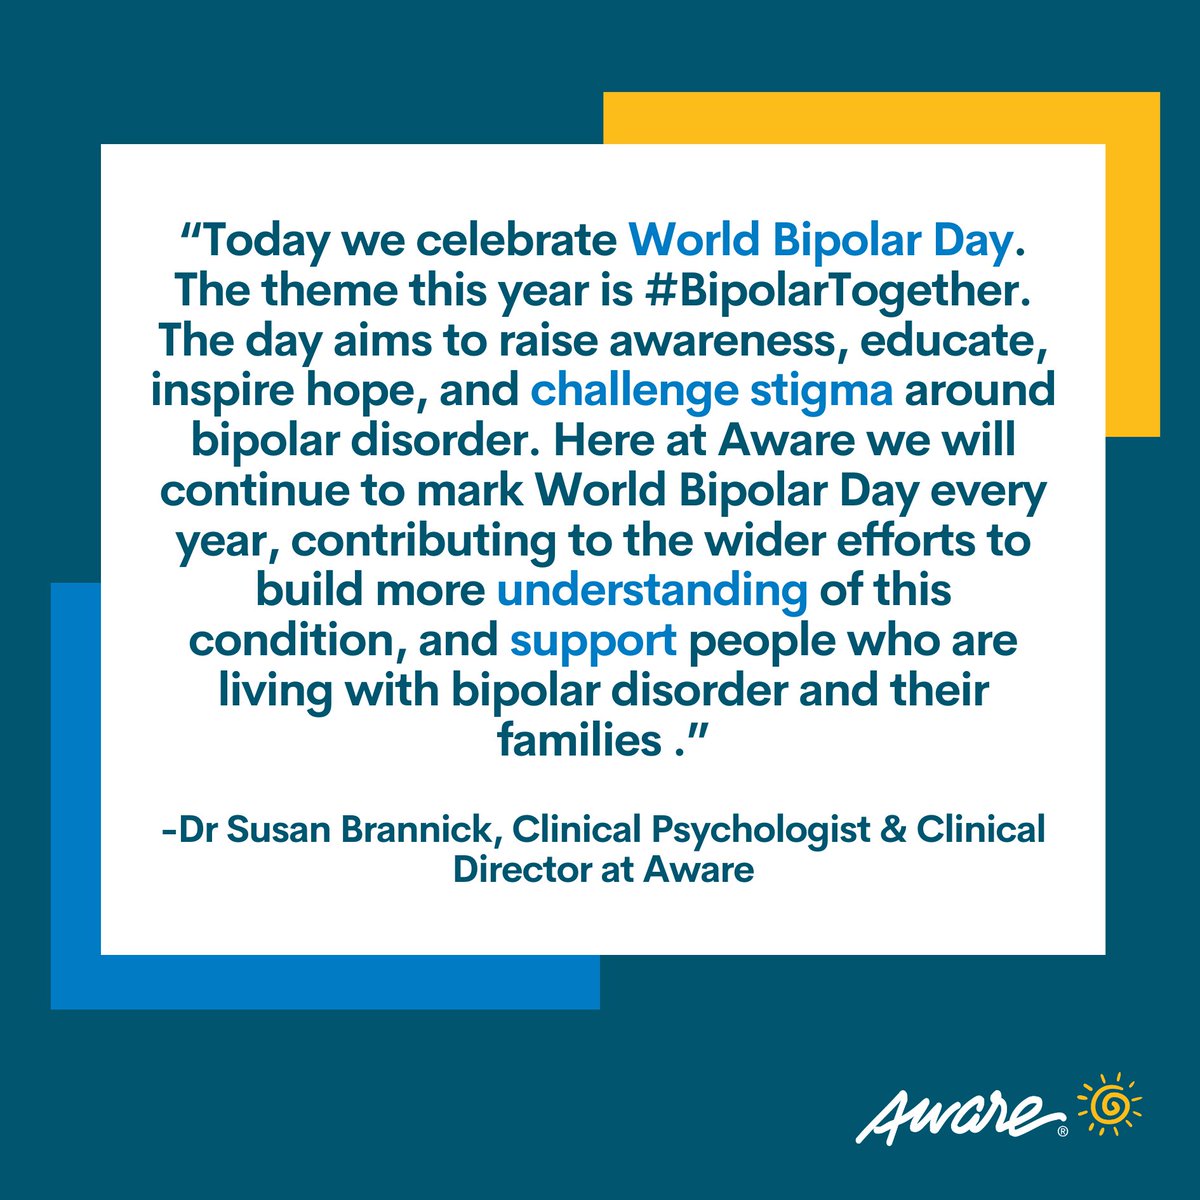 Today we celebrate #WorldBipolarDay. This year’s global theme of #BipolarTogether aims to connect, educate, & inspire hope. Remember you & your loved ones are not alone. See all the free resources available with our World Bipolar Day campaign 👉 aware.ie/world-bipolar-… 3 d